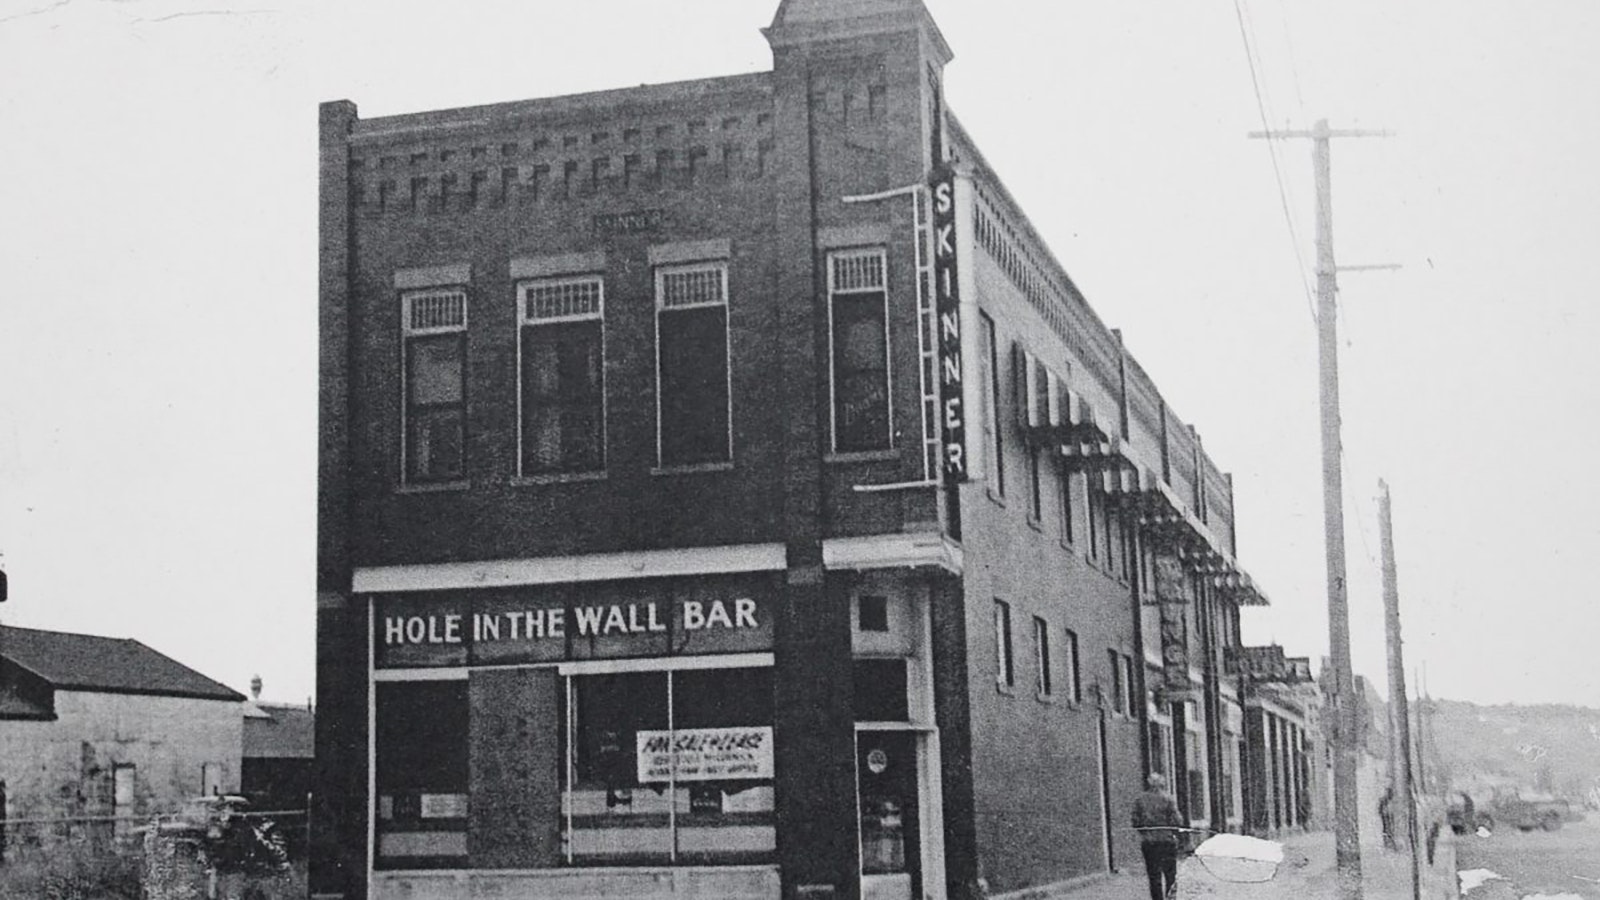 The Hole in the Wall Bar was the place to be once upon a time in Thermopolis at the turn of the 20th century and was a favorite spot for Butch Cassidy's notorious Hole in the Wall outlaw gang.